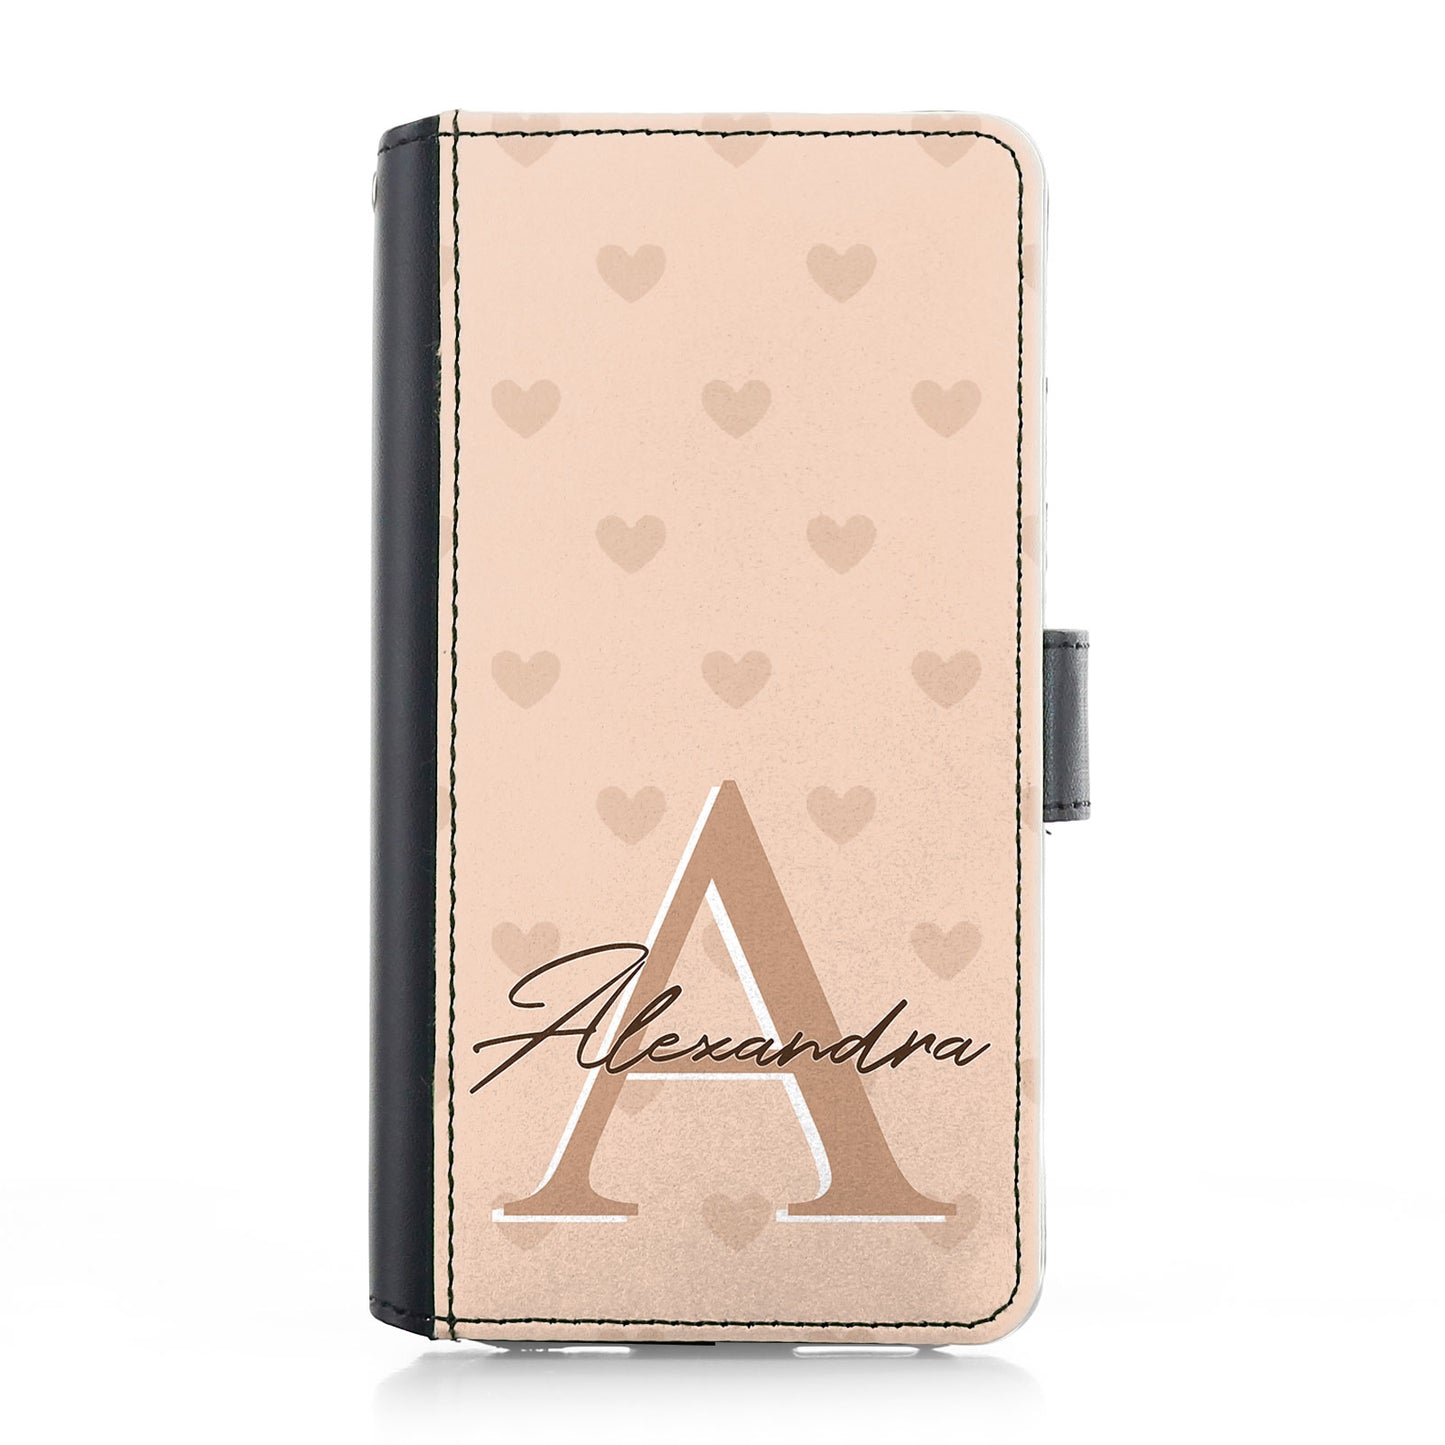 Personalised iPhone Leather Case - Nude Heart Monogram and Name